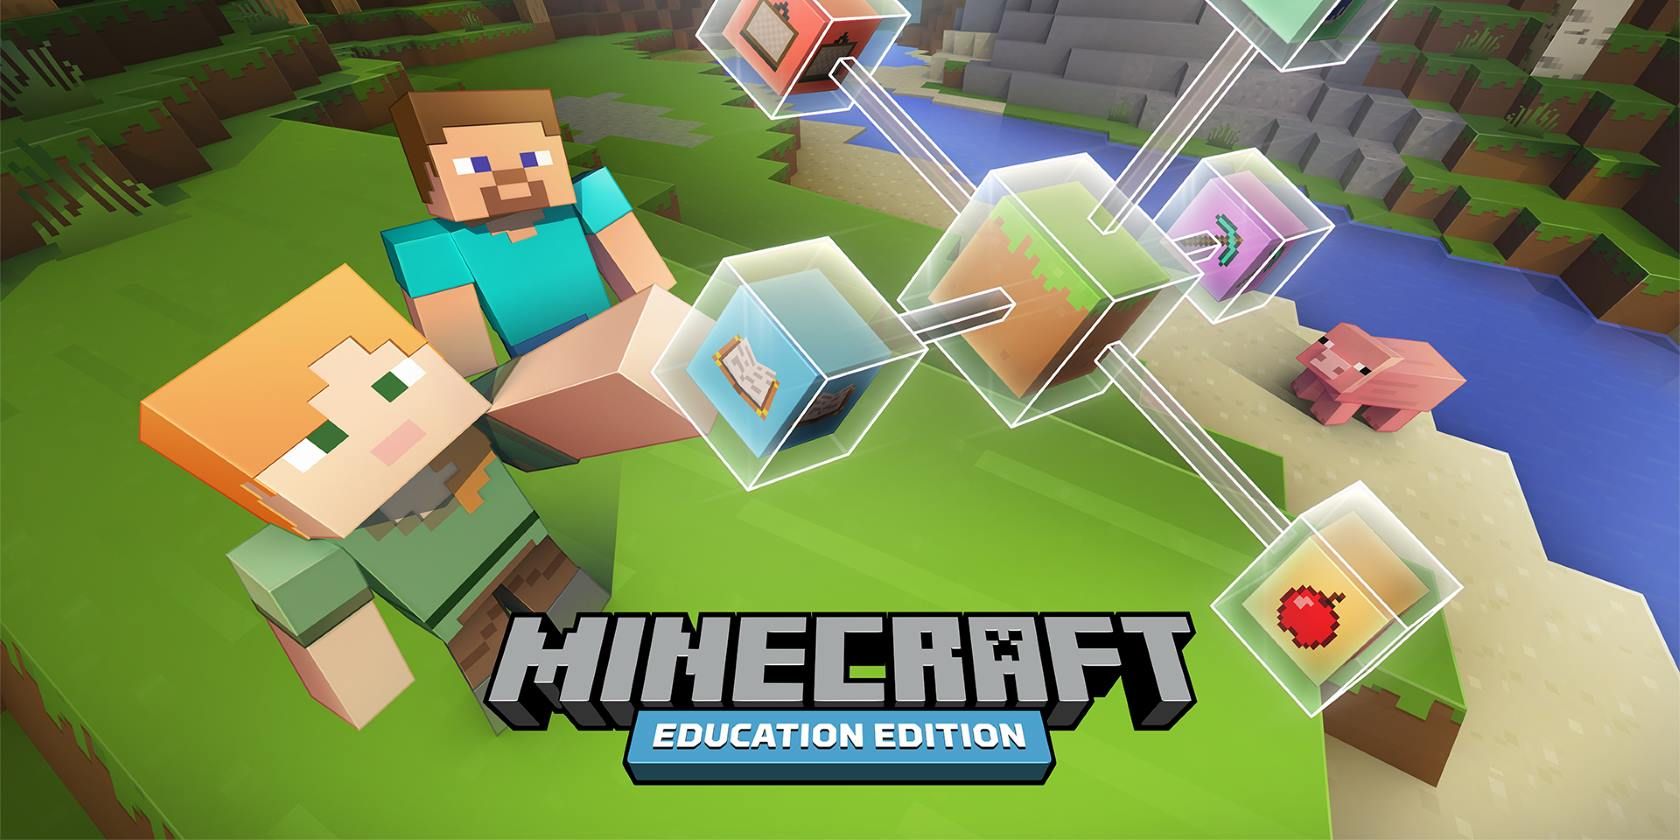 You Can Now Play Minecraft: Education Edition on Chromebooks